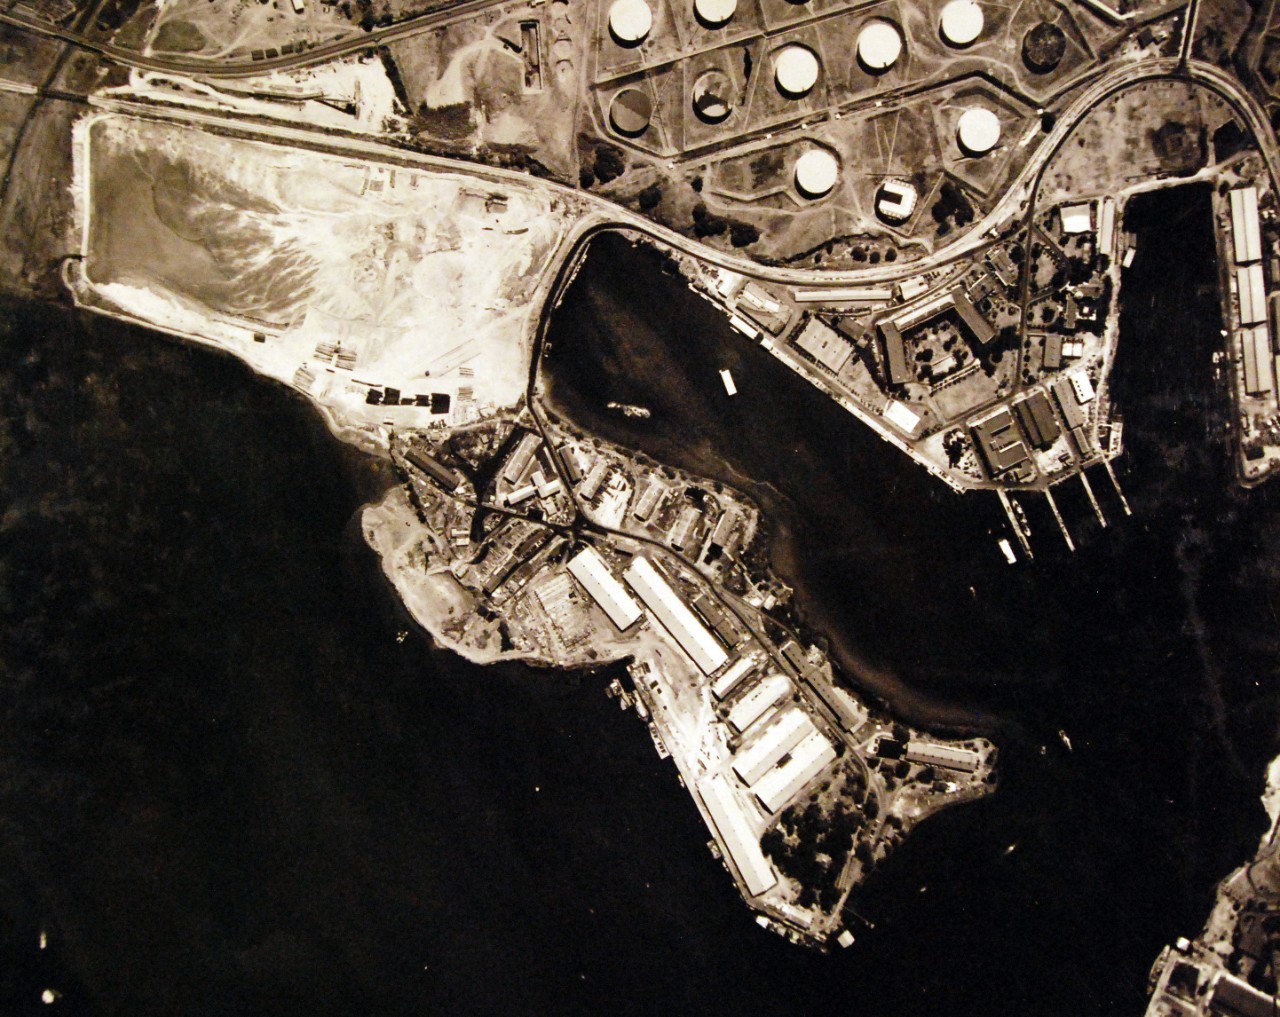 80-G-182875:   Aerial of U.S. Naval Air Station, Pearl Harbor, Supply Base, Magazine Island (lower enter), Navy Yard Submarine Base (right center).   Photograph received August 22, 1941.  U.S. Navy photograph, now in the collections of the National Archives (8/25/2015).